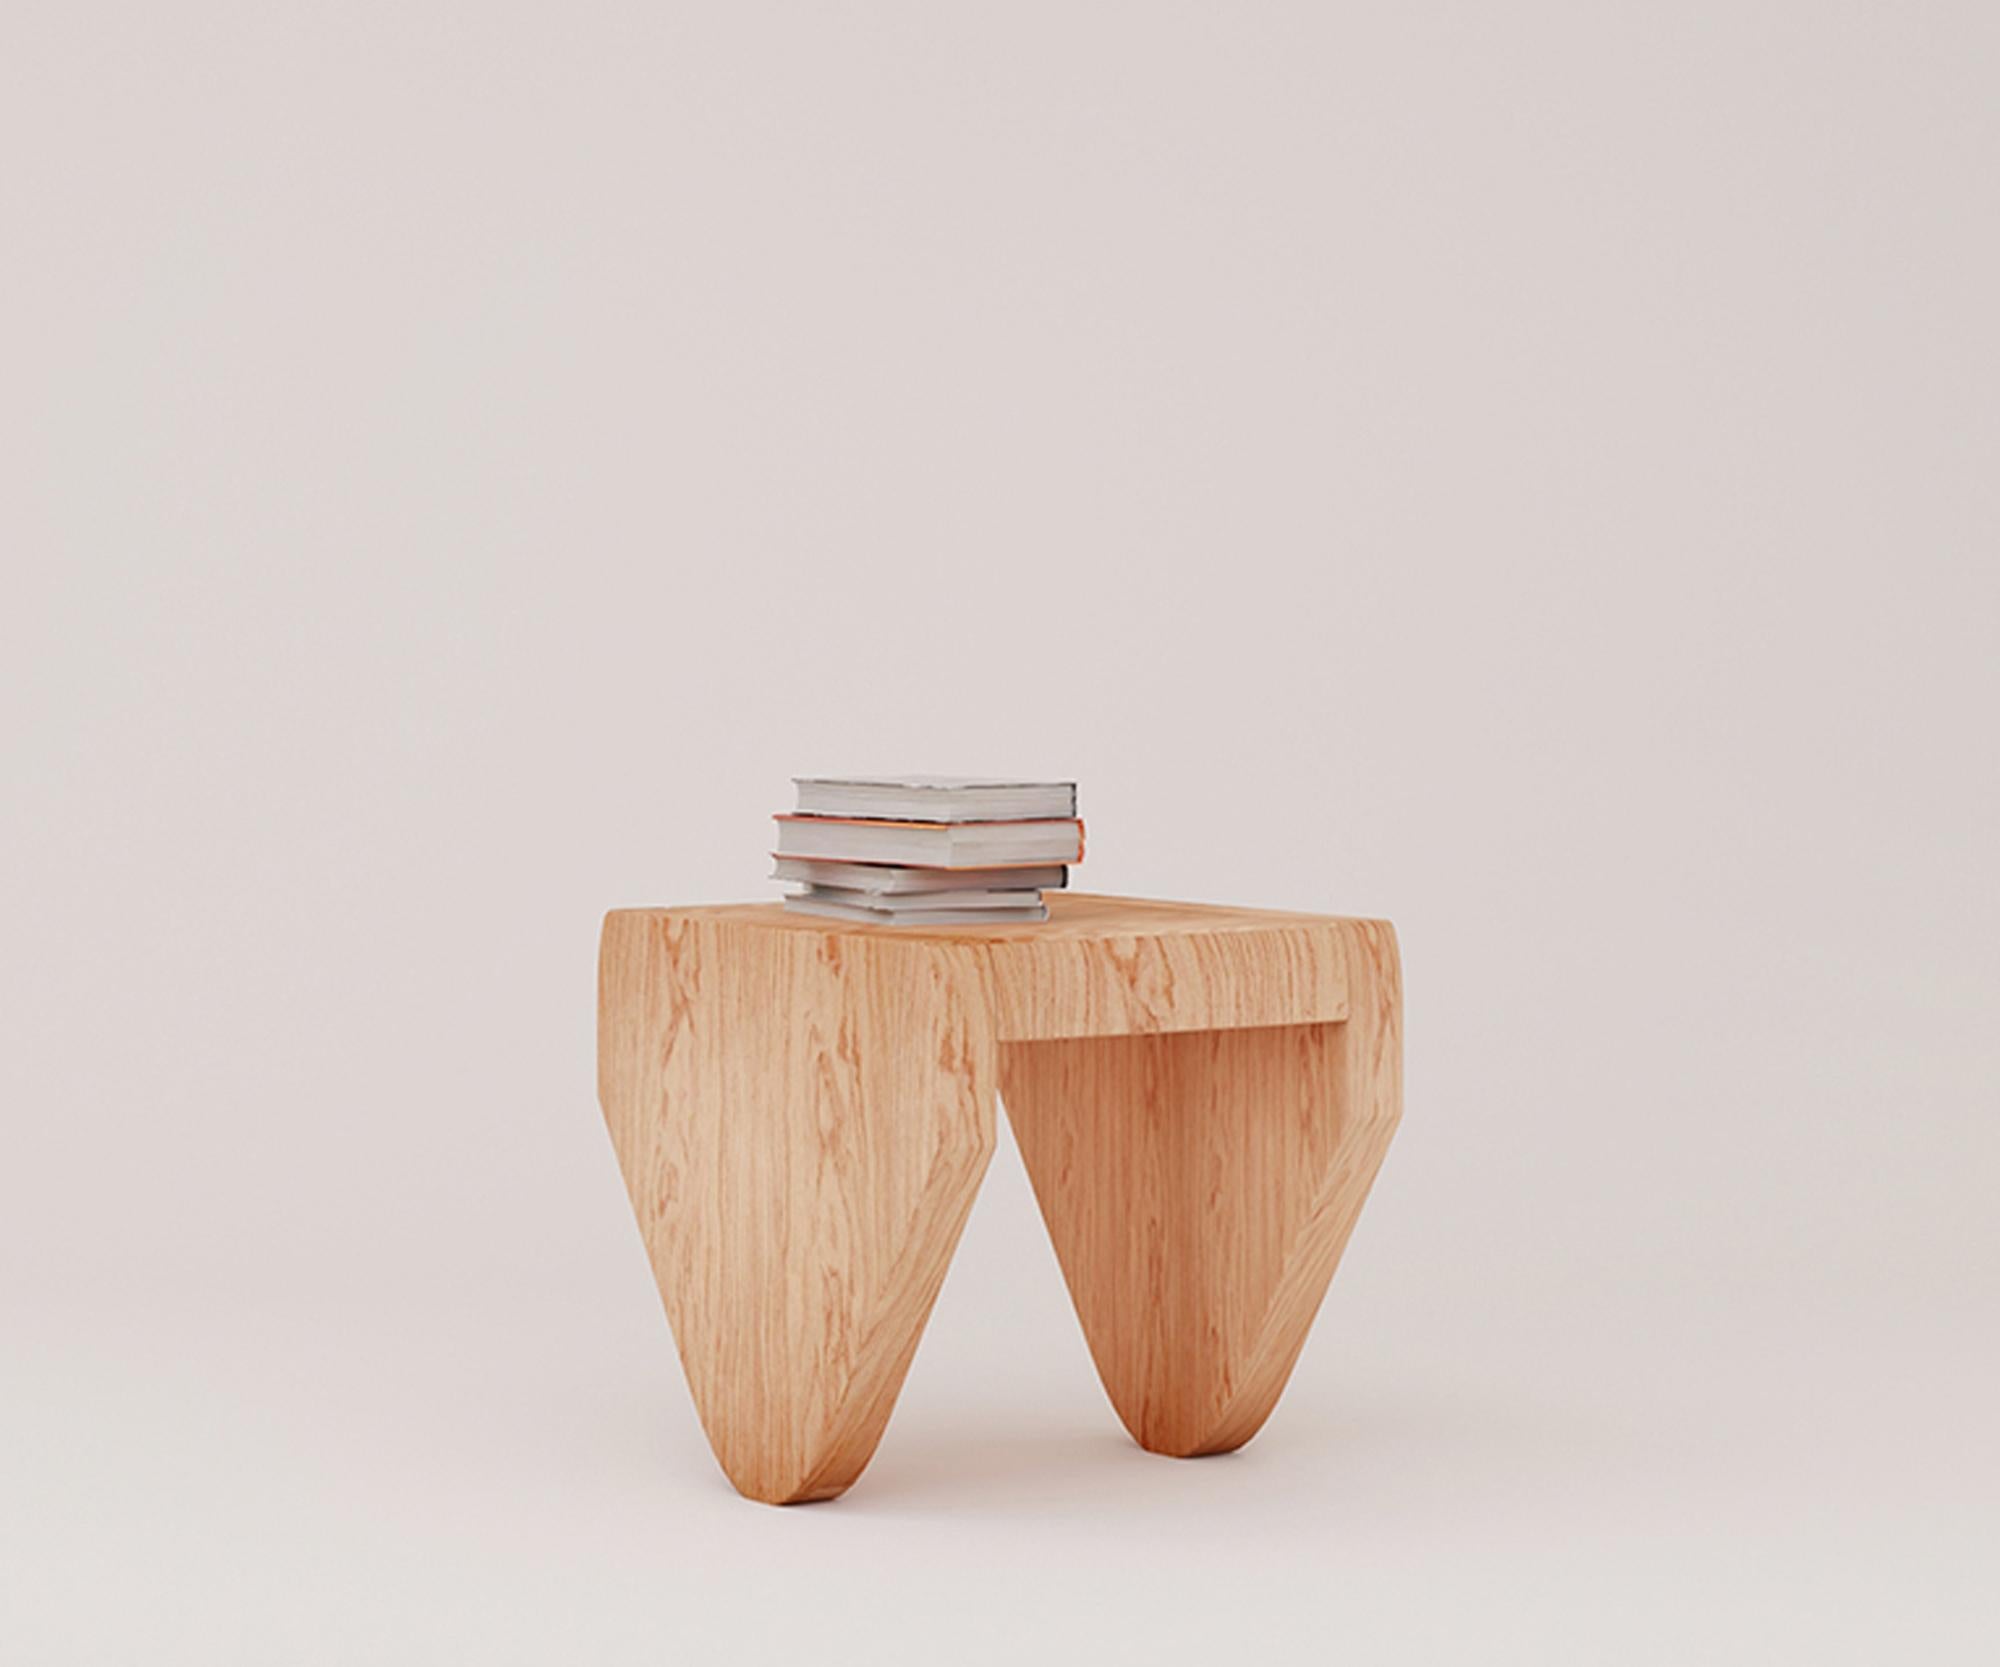 Hand-Crafted Modern Triangle Table by Rejo Studio